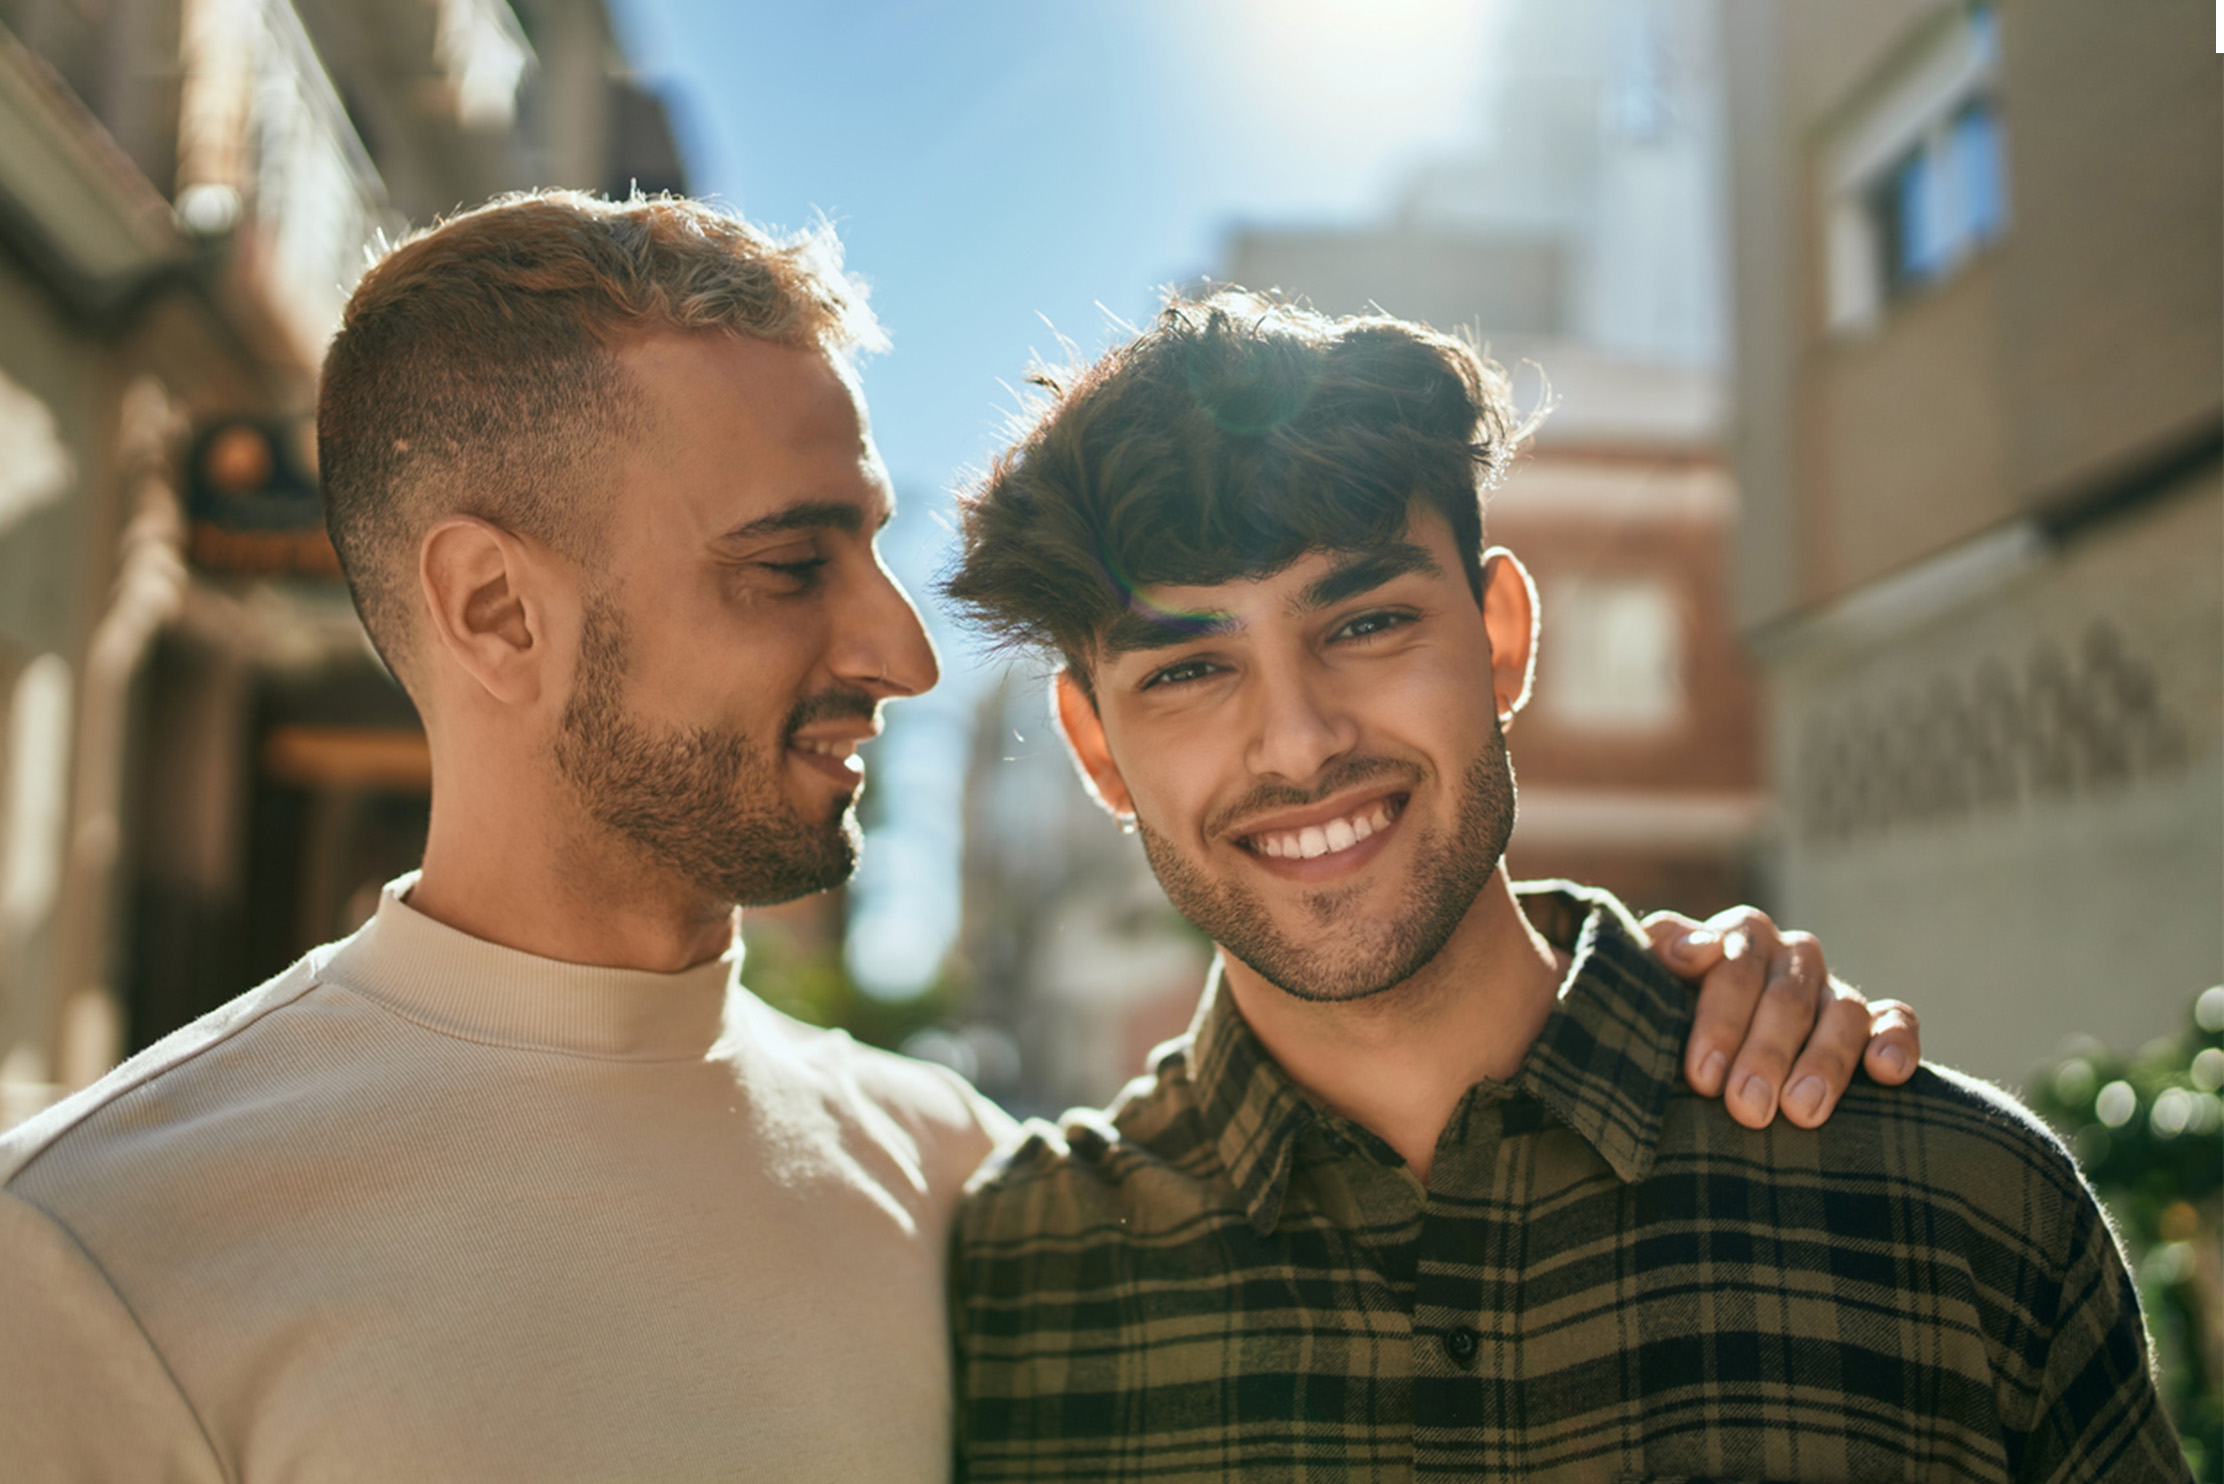 A gay couple smile in the sun